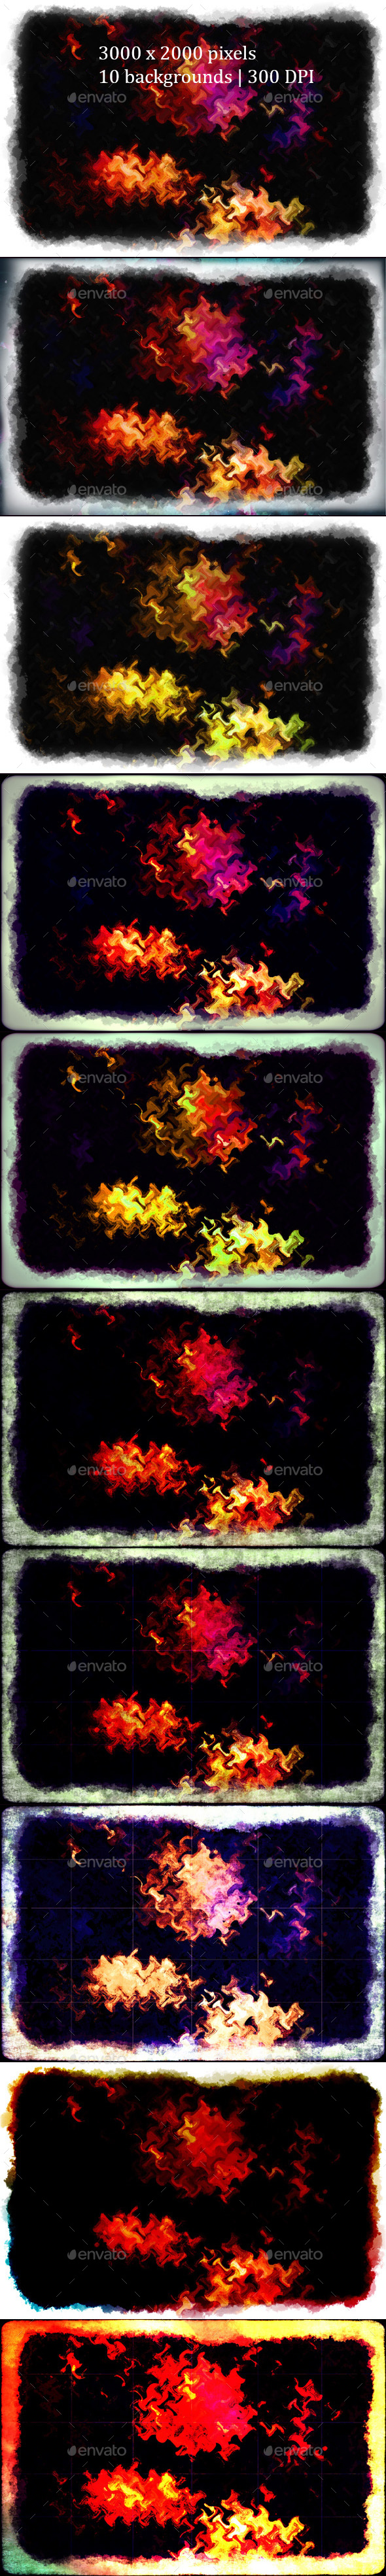 Grunge Abstract Backgrounds